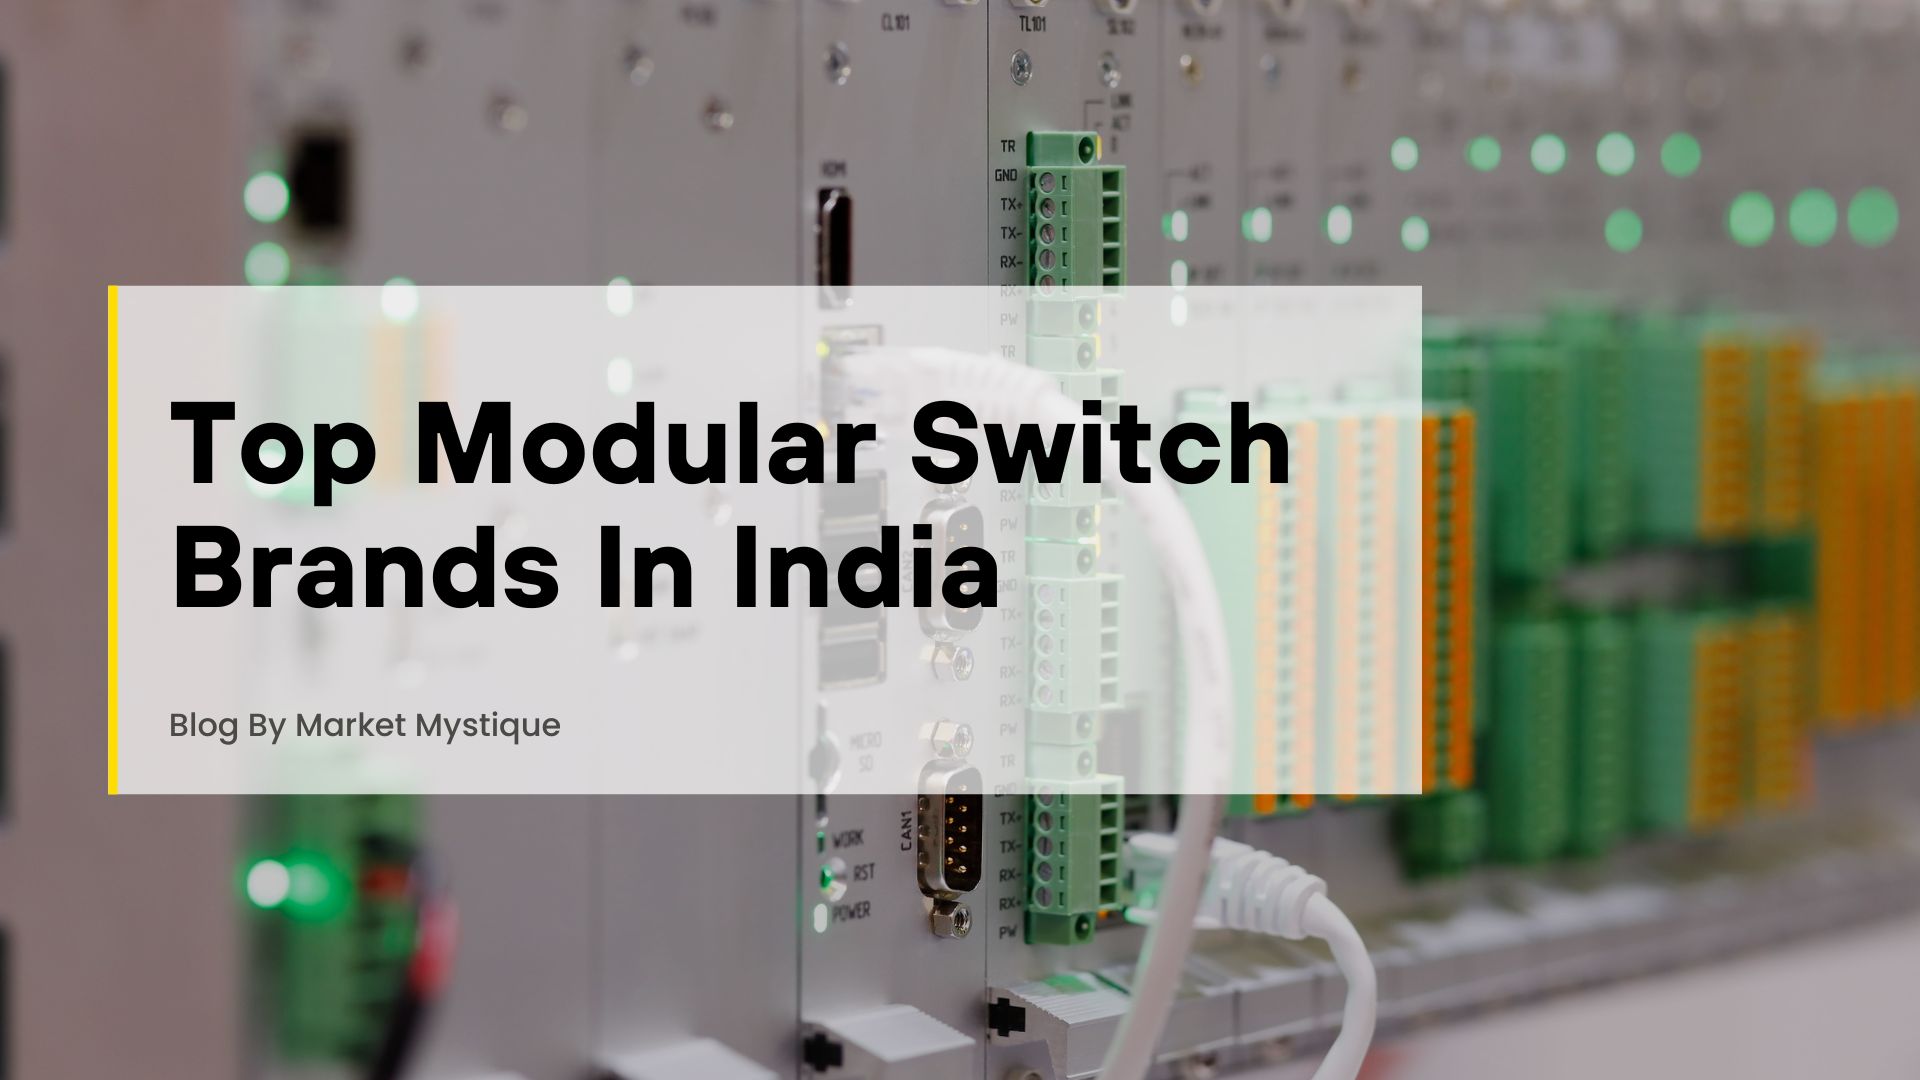 Top 10 Modular Switch Brands In India